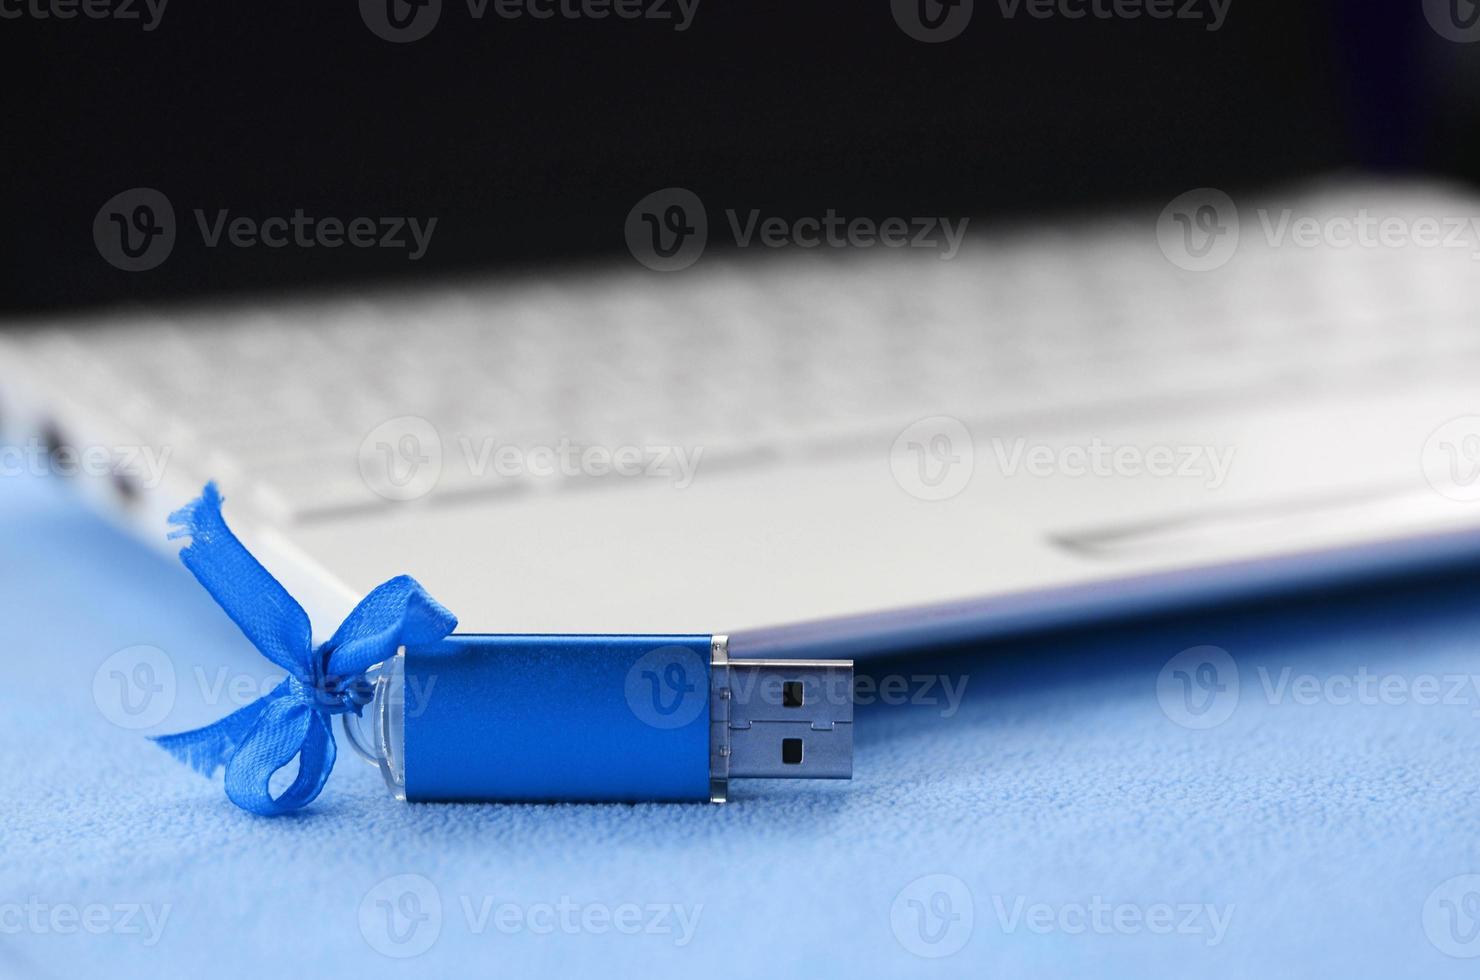 Brilliant blue usb flash memory card with a blue bow lies on a blanket of soft and furry light blue fleece fabric beside to a white laptop. Classic female gift design for a memory card photo